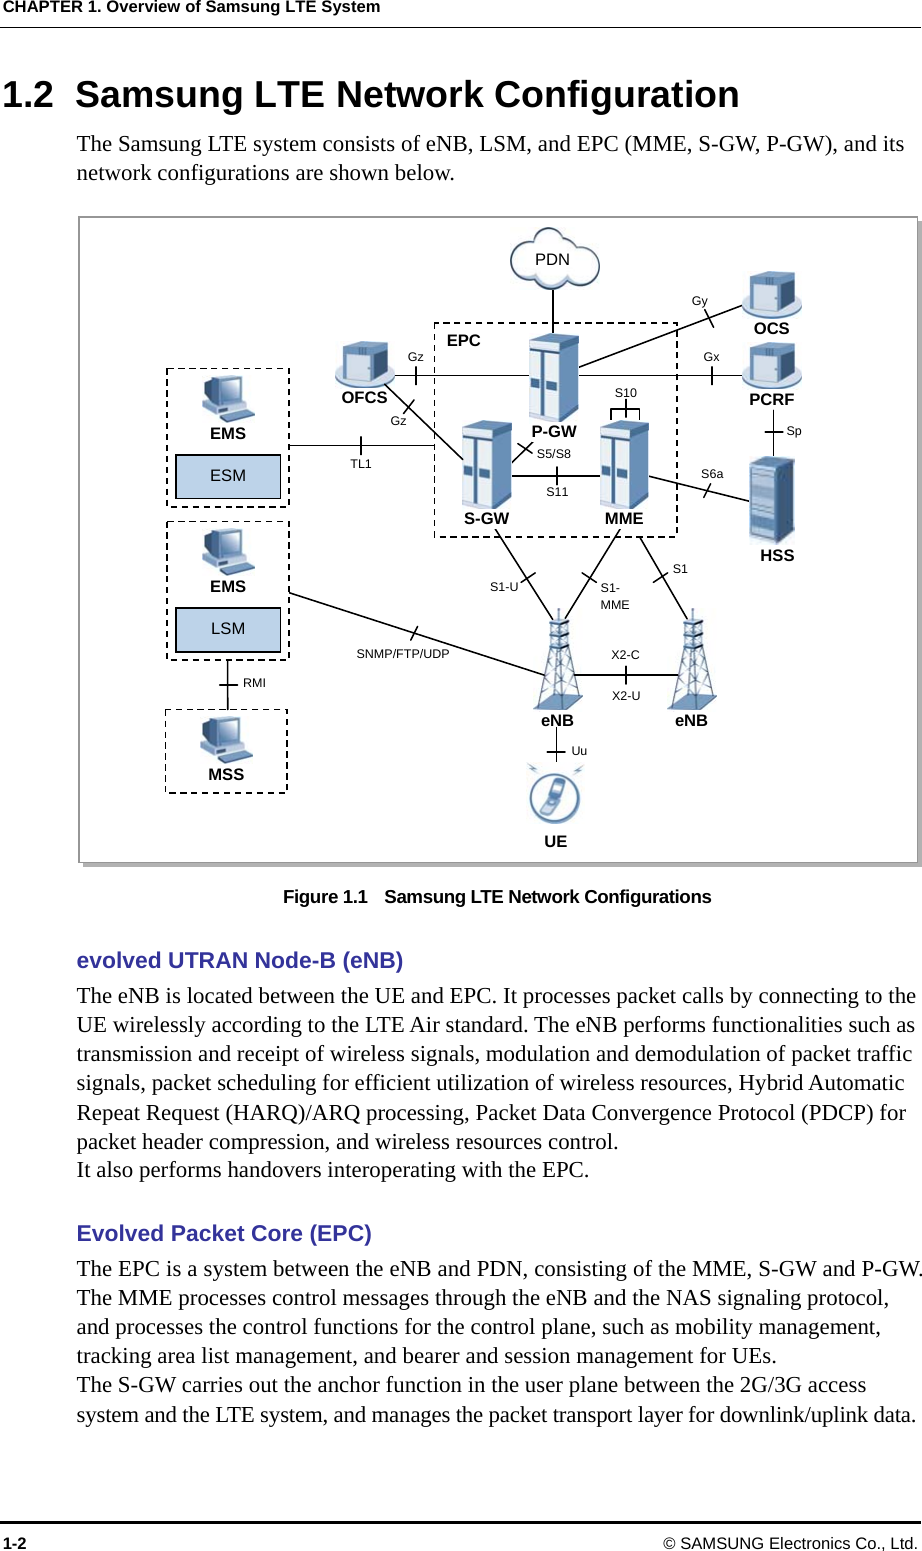 CHAPTER 1. Overview of Samsung LTE System 1.2 Samsung LTE Network Configuration The Samsung LTE system consists of eNB, LSM, and EPC (MME, S-GW, P-GW), and its network configurations are shown below.  RMI MSS EMS ESM EPC P-GW OCS PCRF OFCSeNB  eNB PDN MME S-GW LSM EMS TL1 Sp Gx Gy S10 Gz Gz Uu X2-C X2-U S1 S1- MME S1-U S5/S8 S11 S6a HSS UE SNMP/FTP/UDP Figure 1.1    Samsung LTE Network Configurations  evolved UTRAN Node-B (eNB) The eNB is located between the UE and EPC. It processes packet calls by connecting to the UE wirelessly according to the LTE Air standard. The eNB performs functionalities such as transmission and receipt of wireless signals, modulation and demodulation of packet traffic signals, packet scheduling for efficient utilization of wireless resources, Hybrid Automatic Repeat Request (HARQ)/ARQ processing, Packet Data Convergence Protocol (PDCP) for packet header compression, and wireless resources control. It also performs handovers interoperating with the EPC.  Evolved Packet Core (EPC) The EPC is a system between the eNB and PDN, consisting of the MME, S-GW and P-GW.   The MME processes control messages through the eNB and the NAS signaling protocol, and processes the control functions for the control plane, such as mobility management, tracking area list management, and bearer and session management for UEs.   The S-GW carries out the anchor function in the user plane between the 2G/3G access system and the LTE system, and manages the packet transport layer for downlink/uplink data.   1-2 © SAMSUNG Electronics Co., Ltd. 